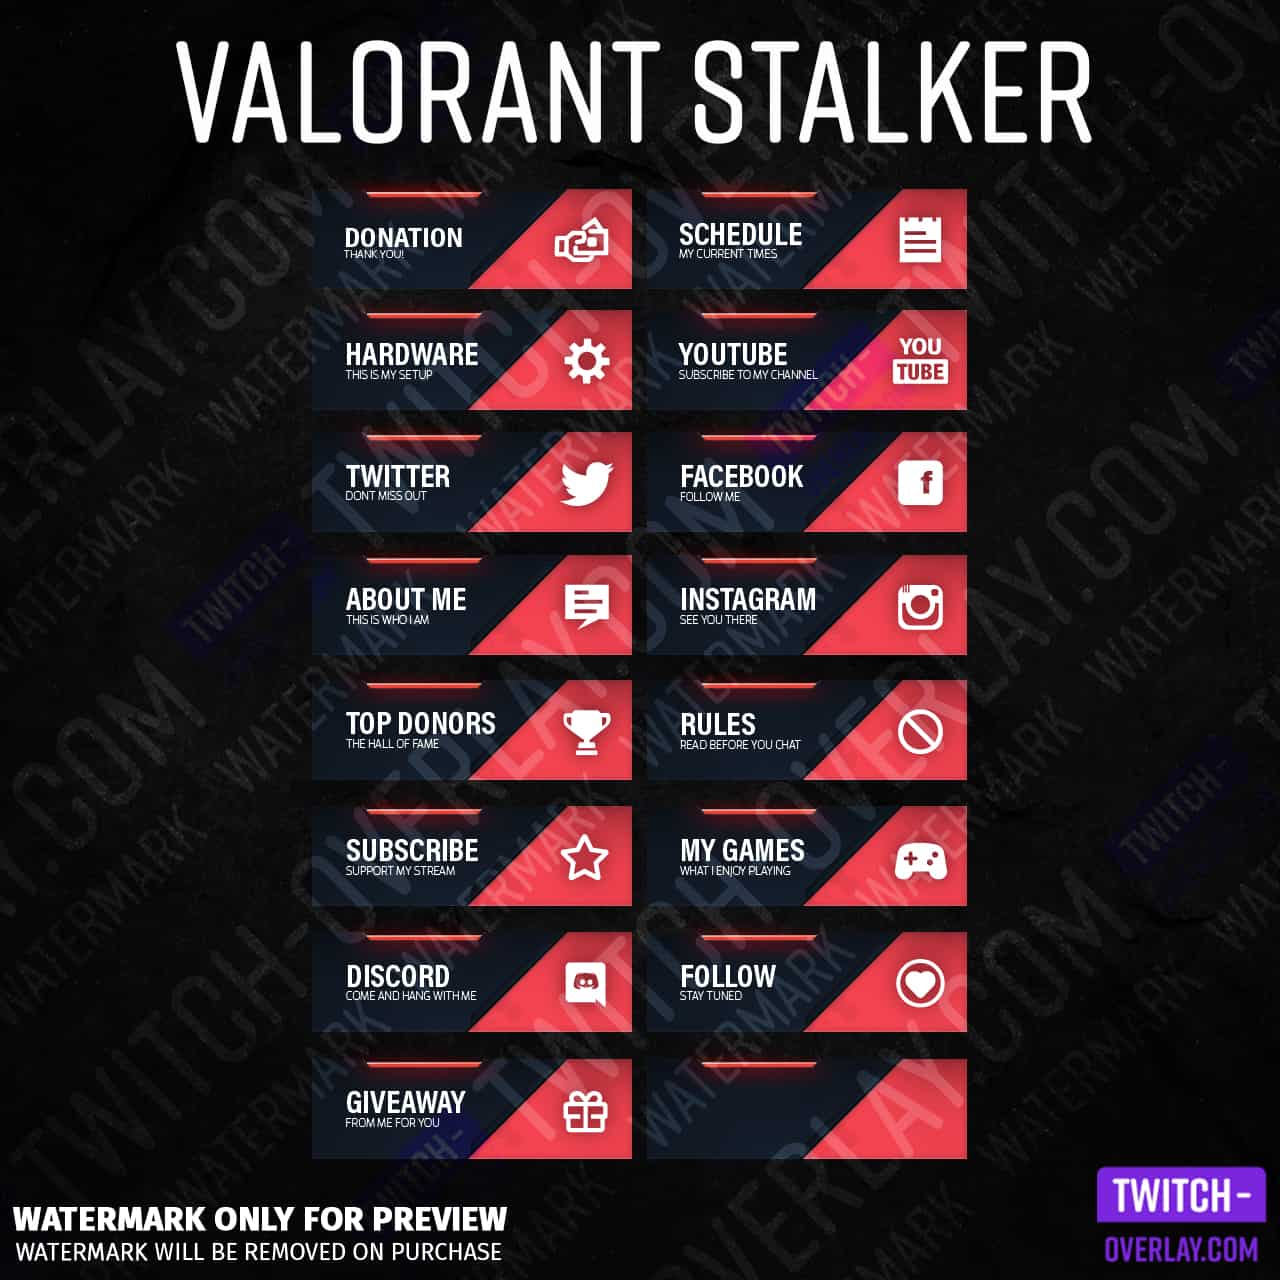 Valorant Twitch Panels - Stalker Edition, the complete set